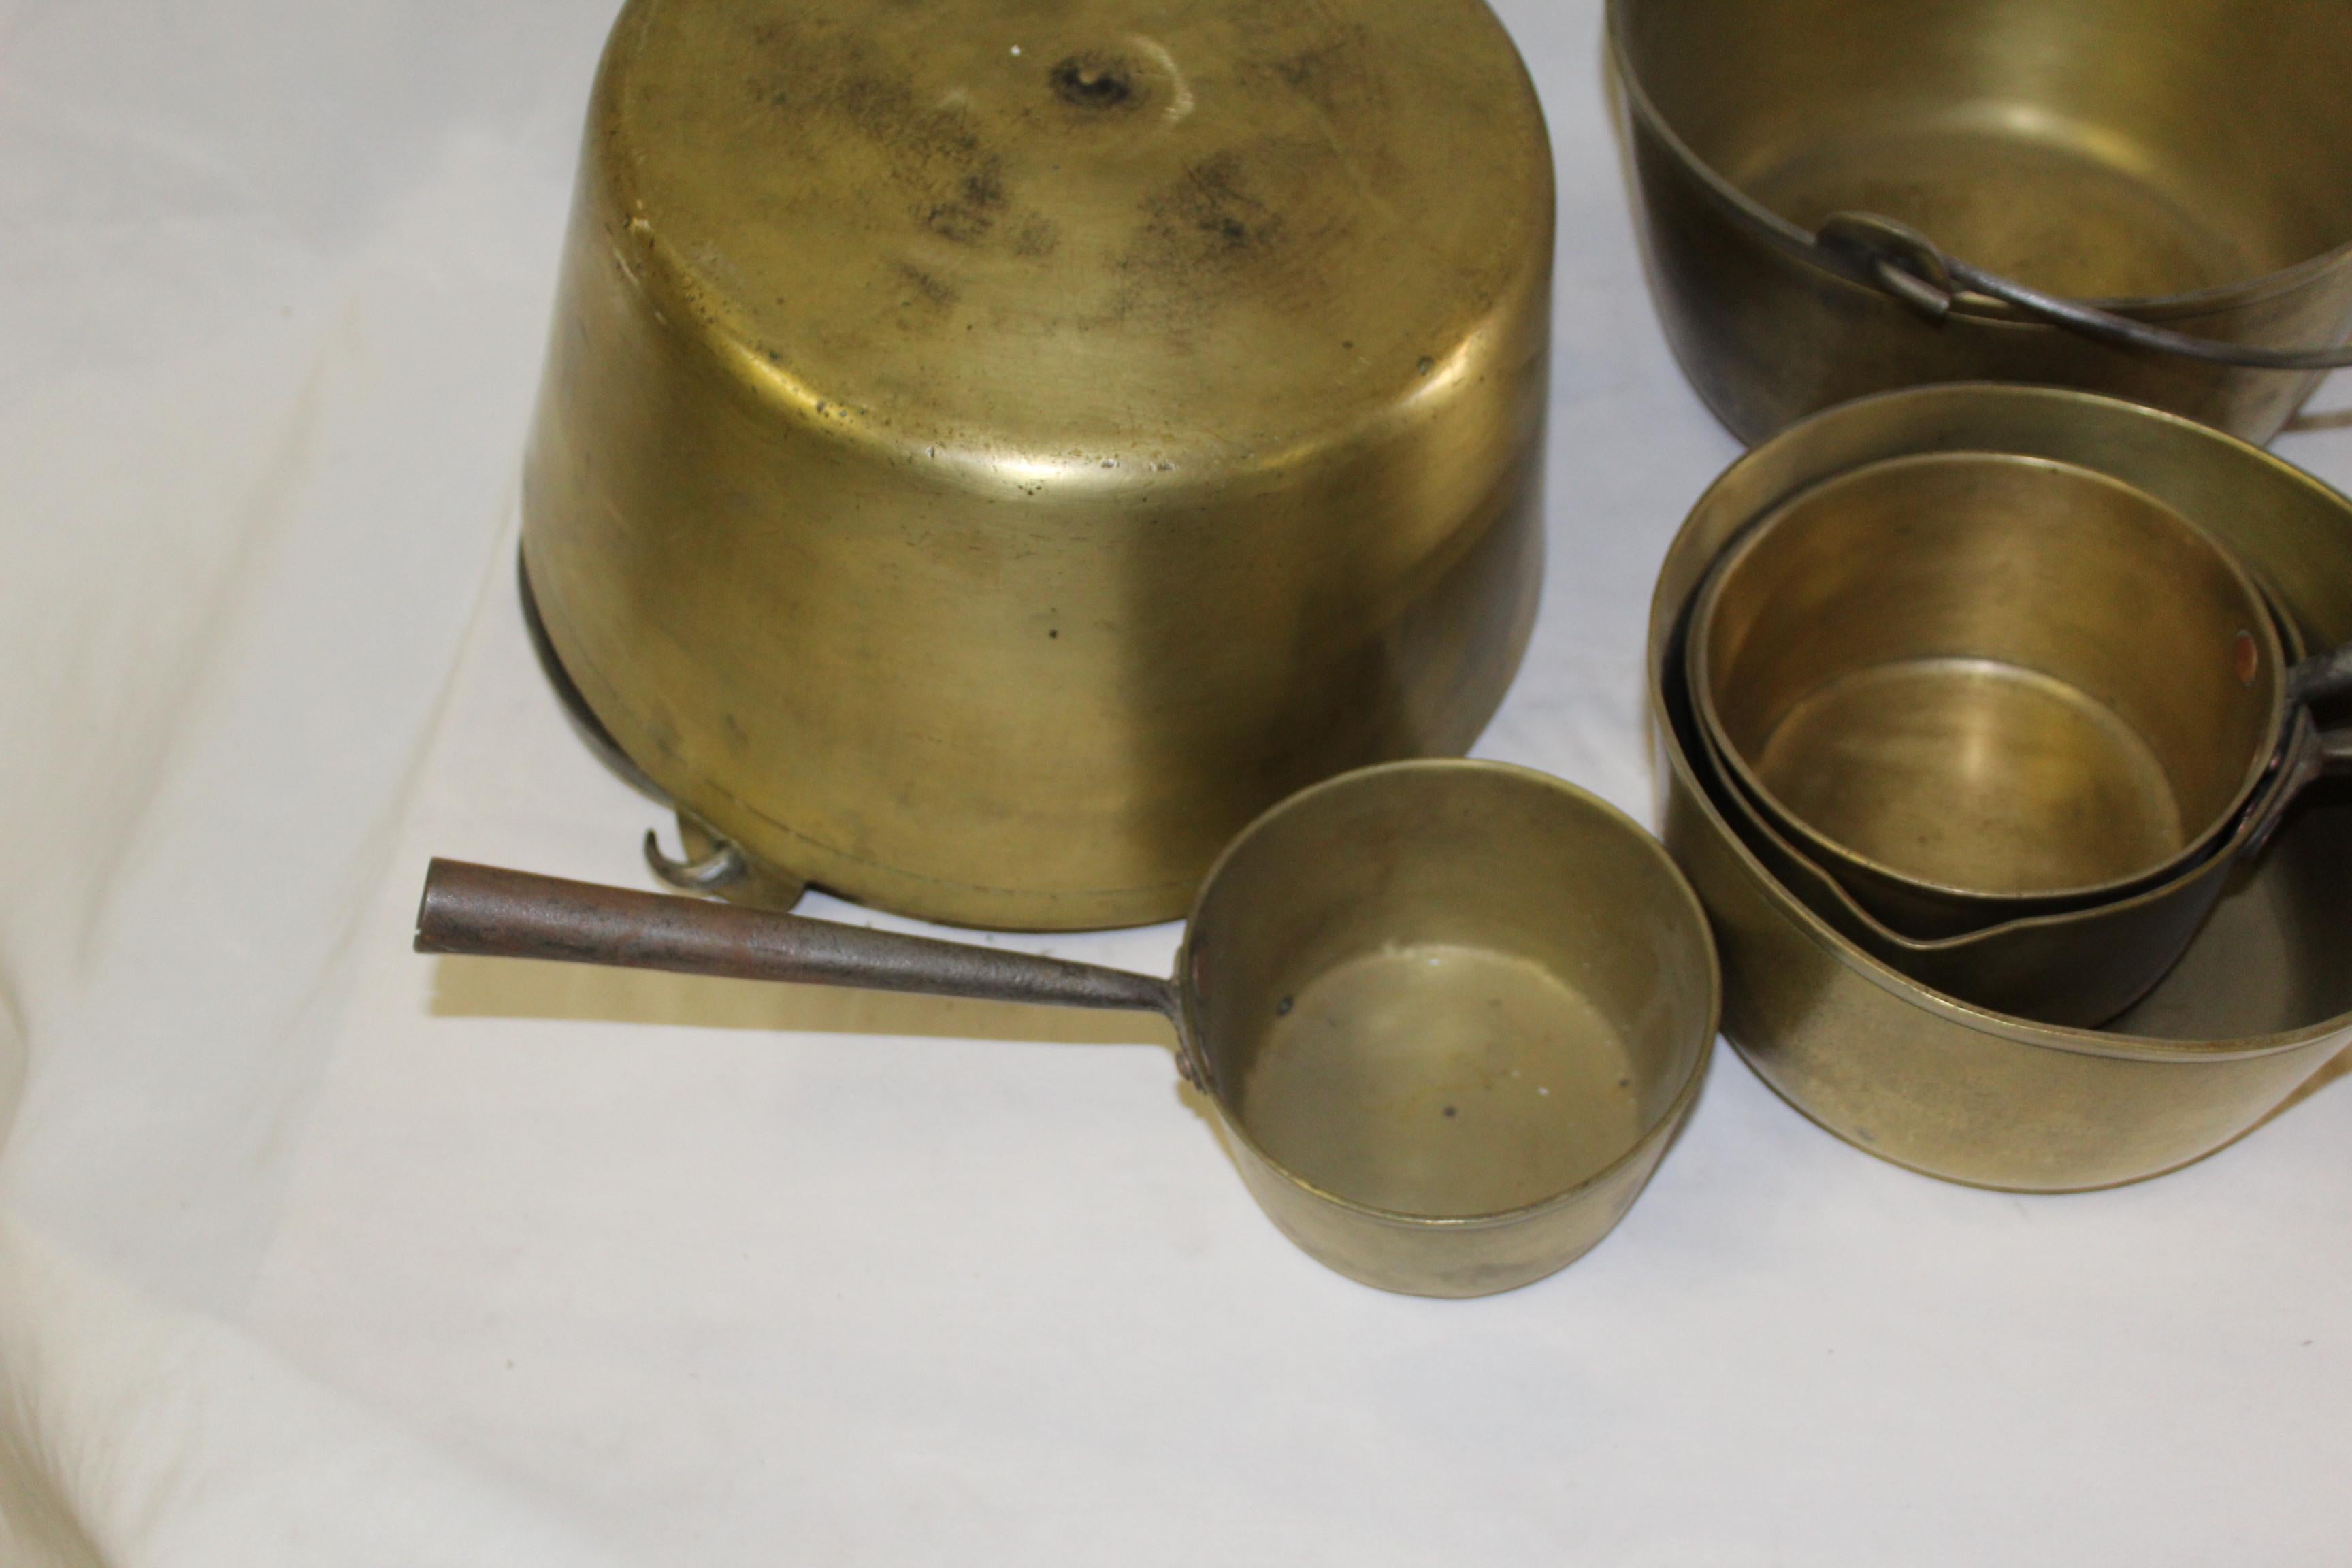 A set of solid brass cooking pots. Handmade steel handles with copper rivets used to attach the handles. All cleaned up and well taken care of. Great for displays or can be used. The large one is 12